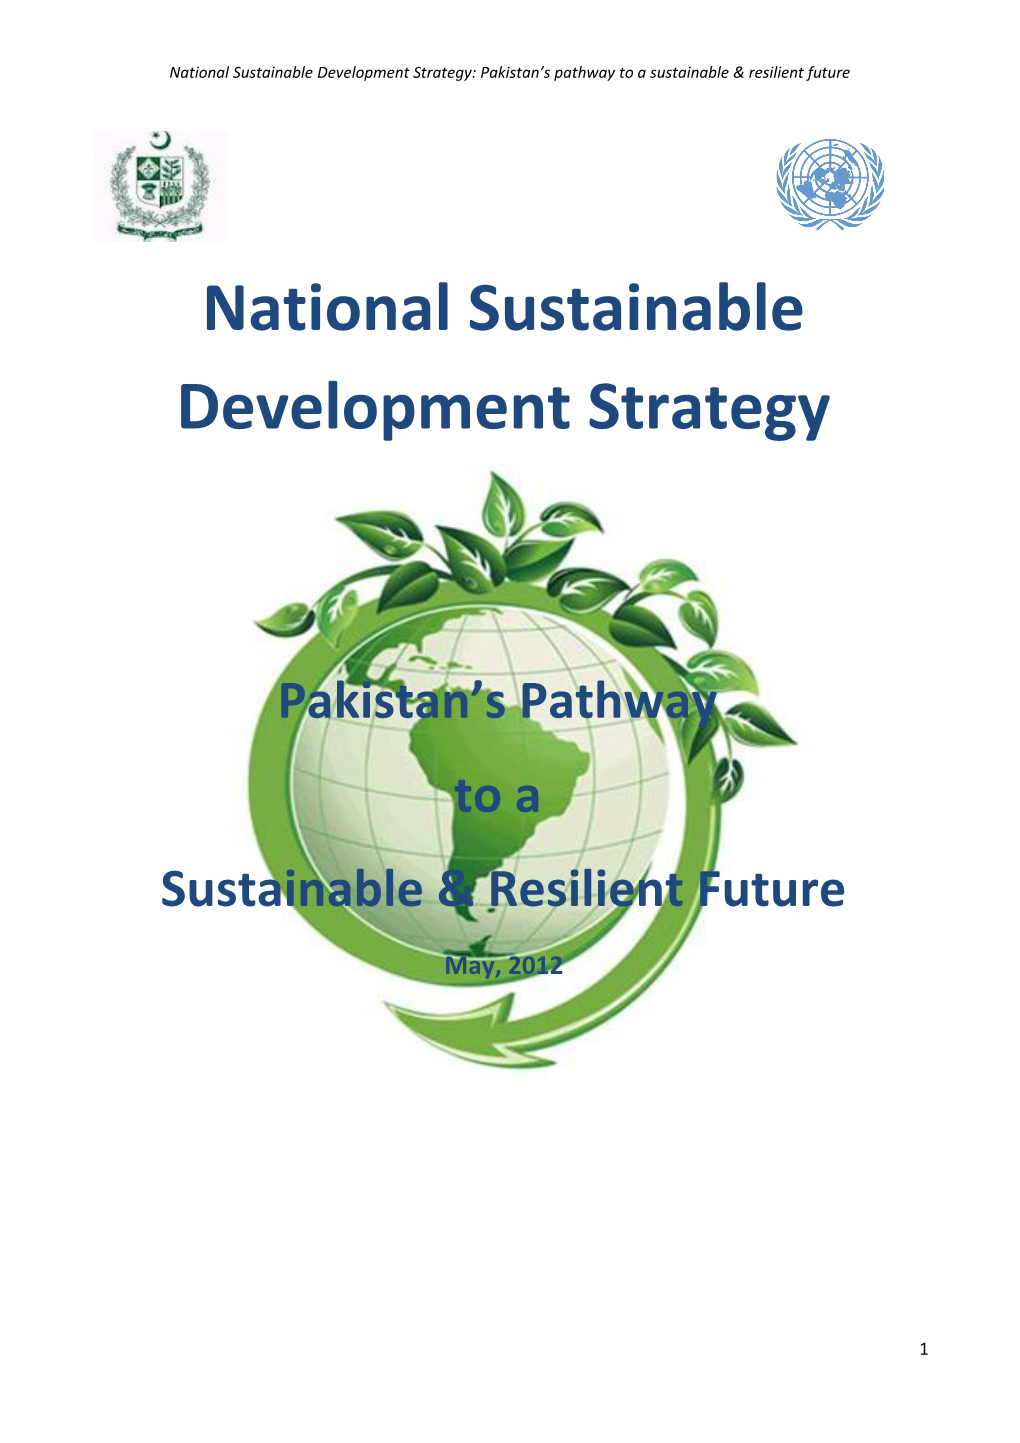 National Sustainable Development Strategy: Pakistan S Pathway to a Sustainable & Resilient